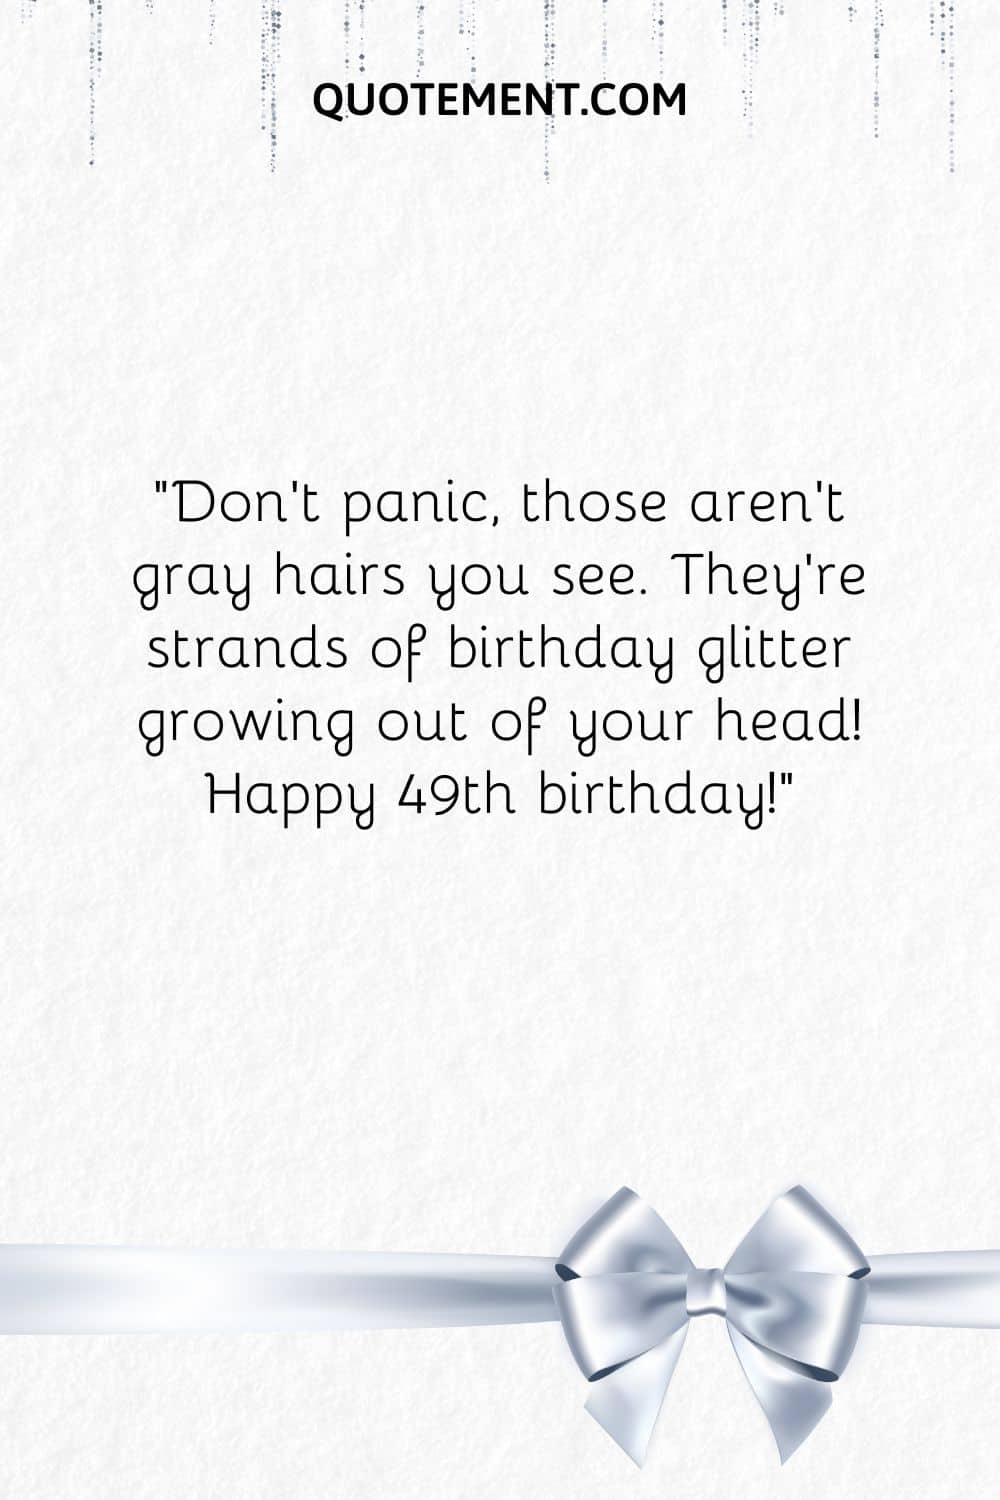 Don't panic, those aren't gray hairs you see